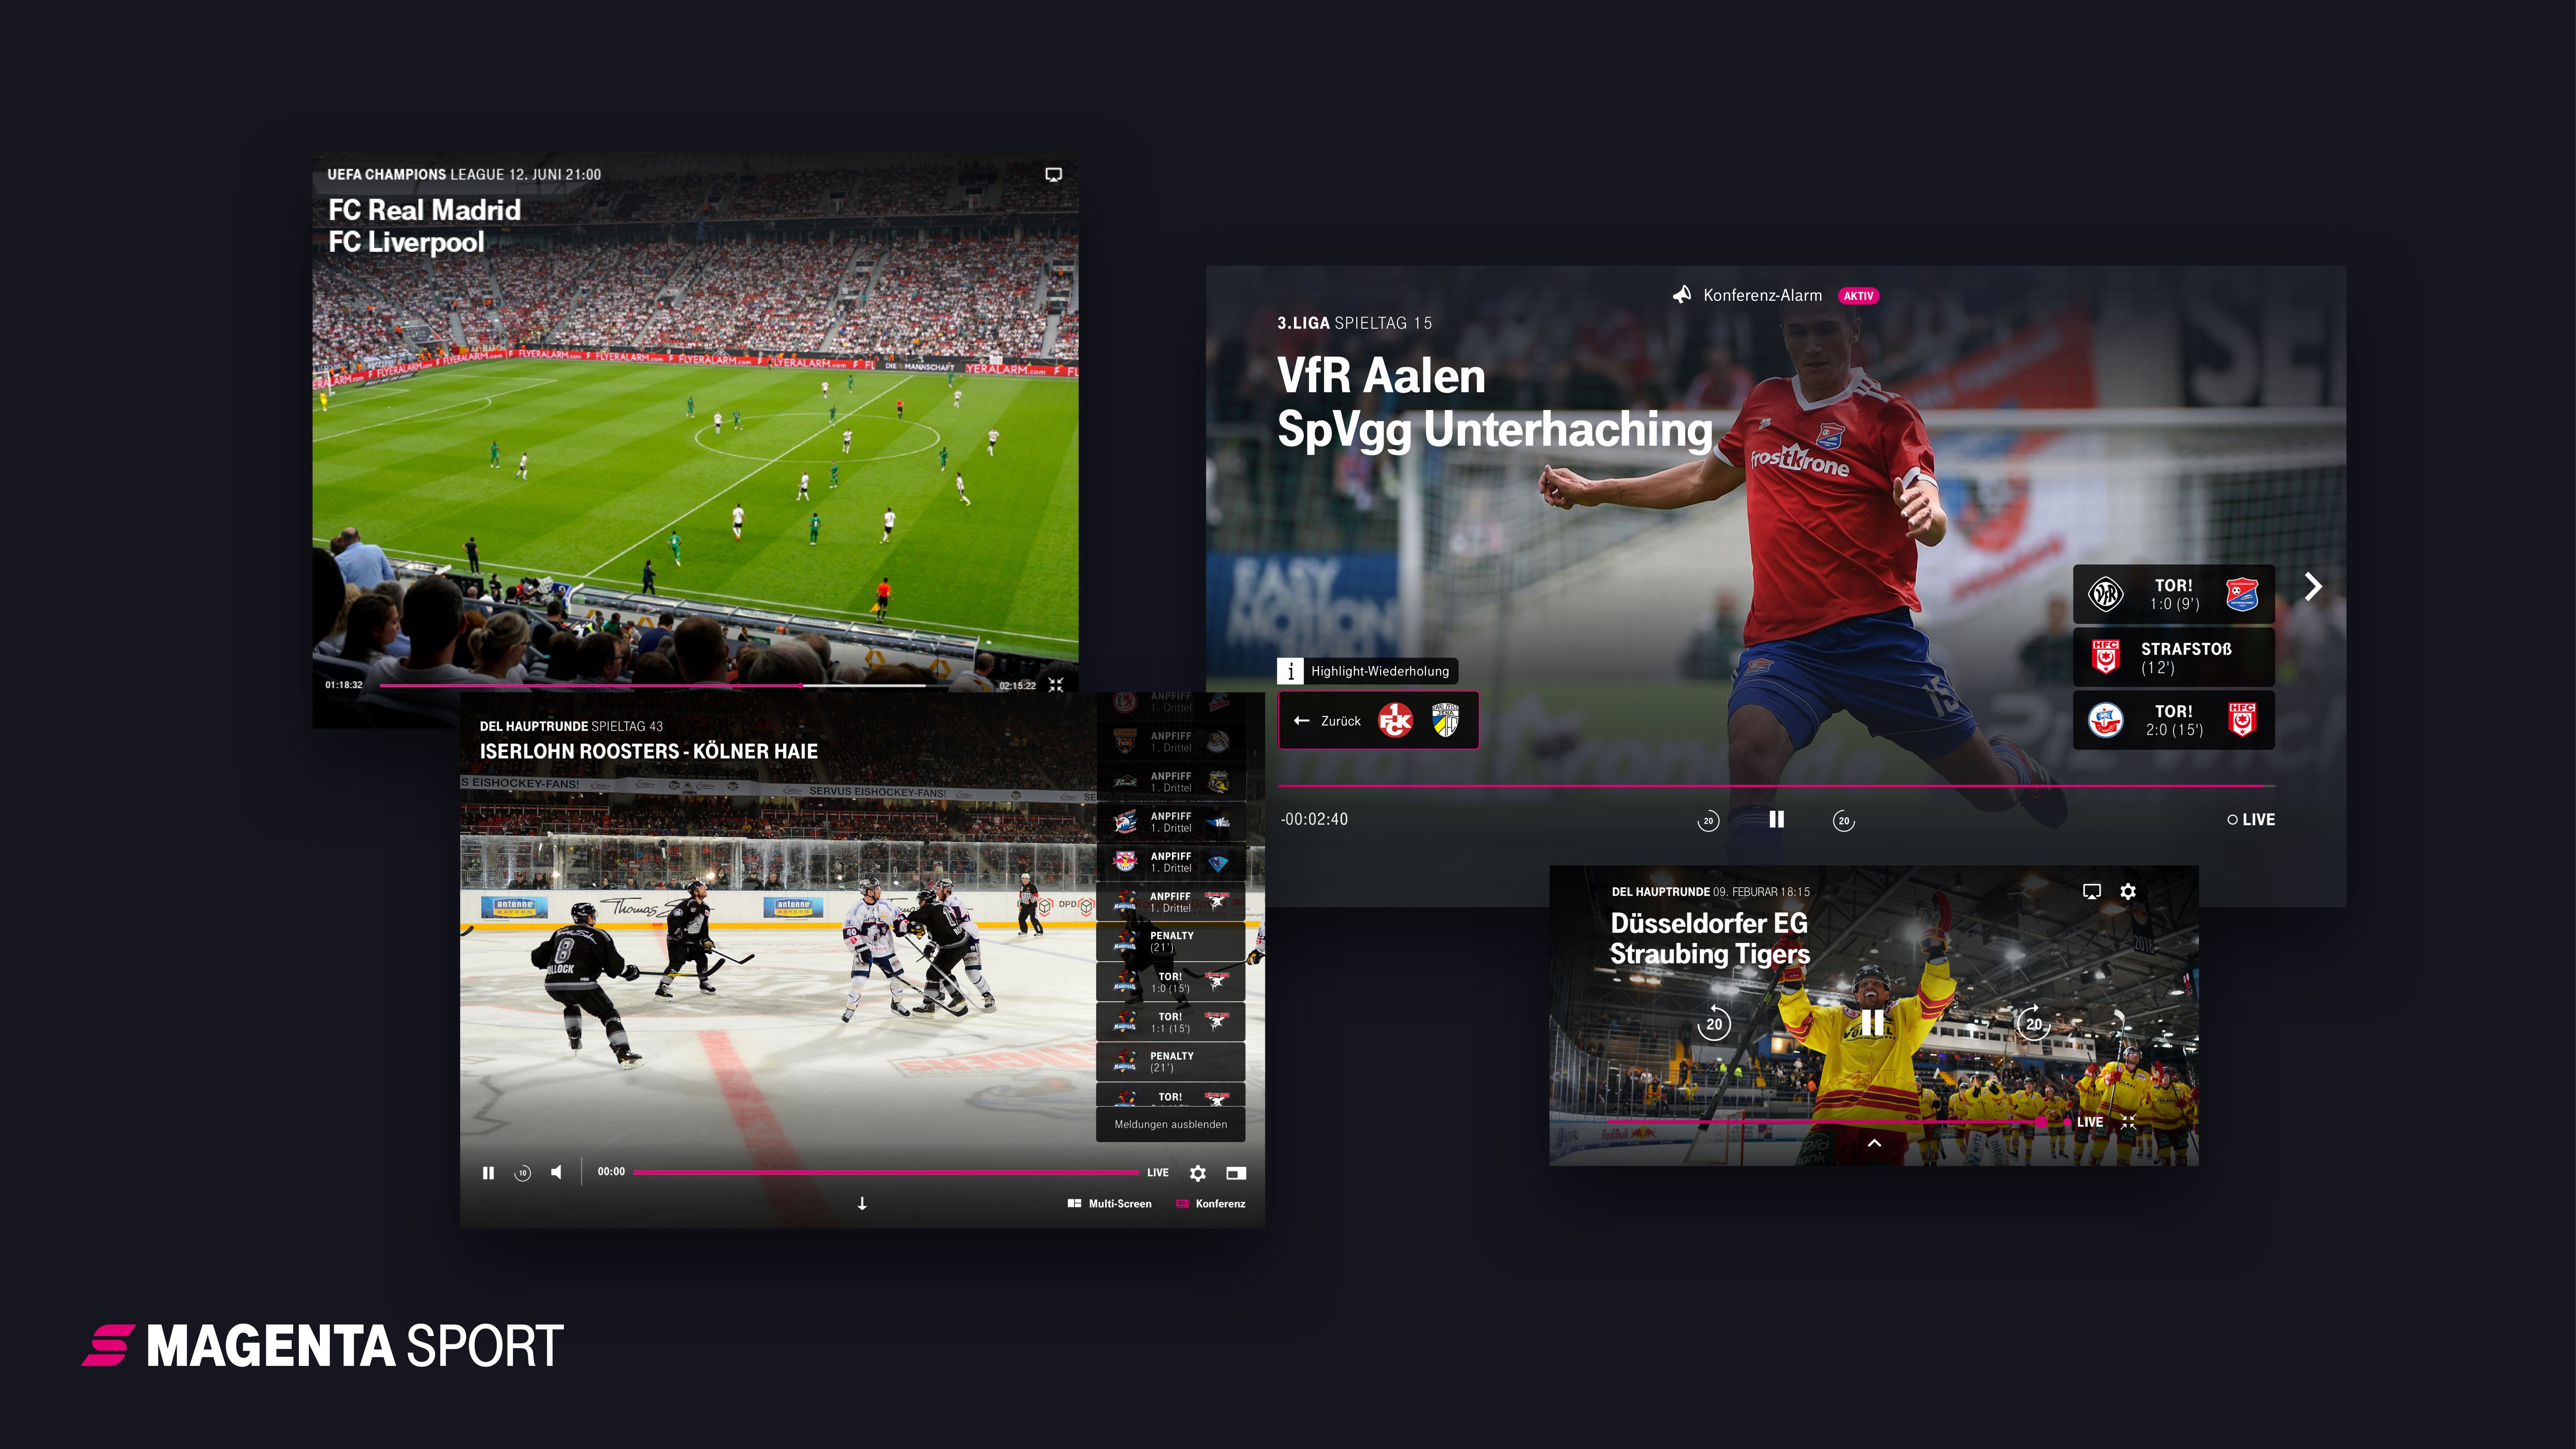 MagentaSport A fan-centric video player for sports enthusiasts